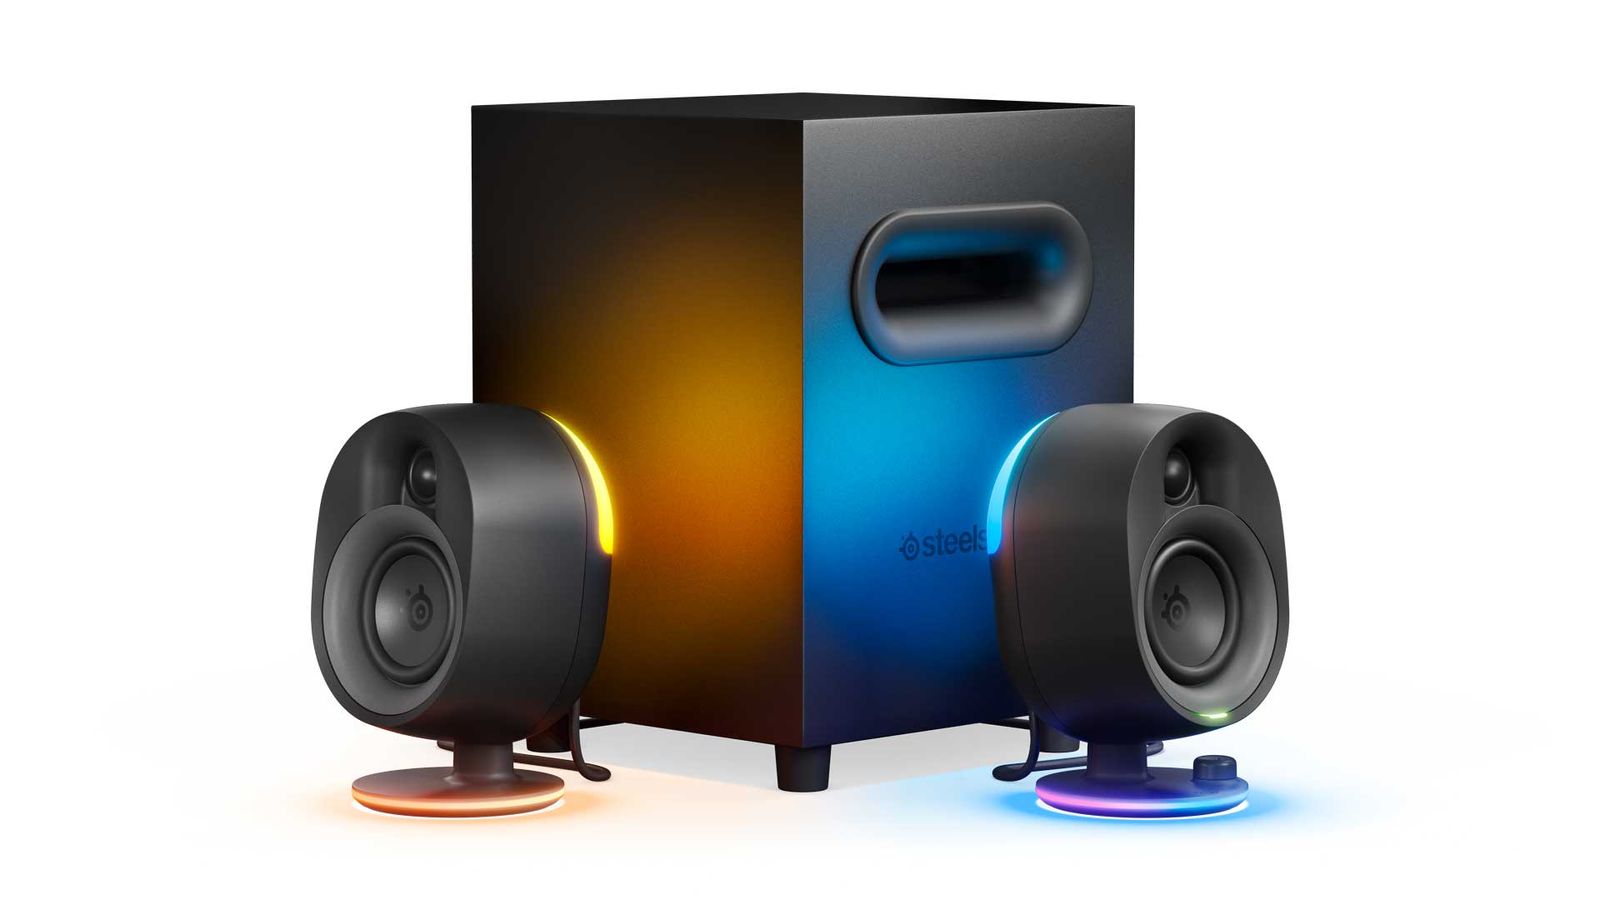 The Steelseries Arena 7 speakers and subwoofer.